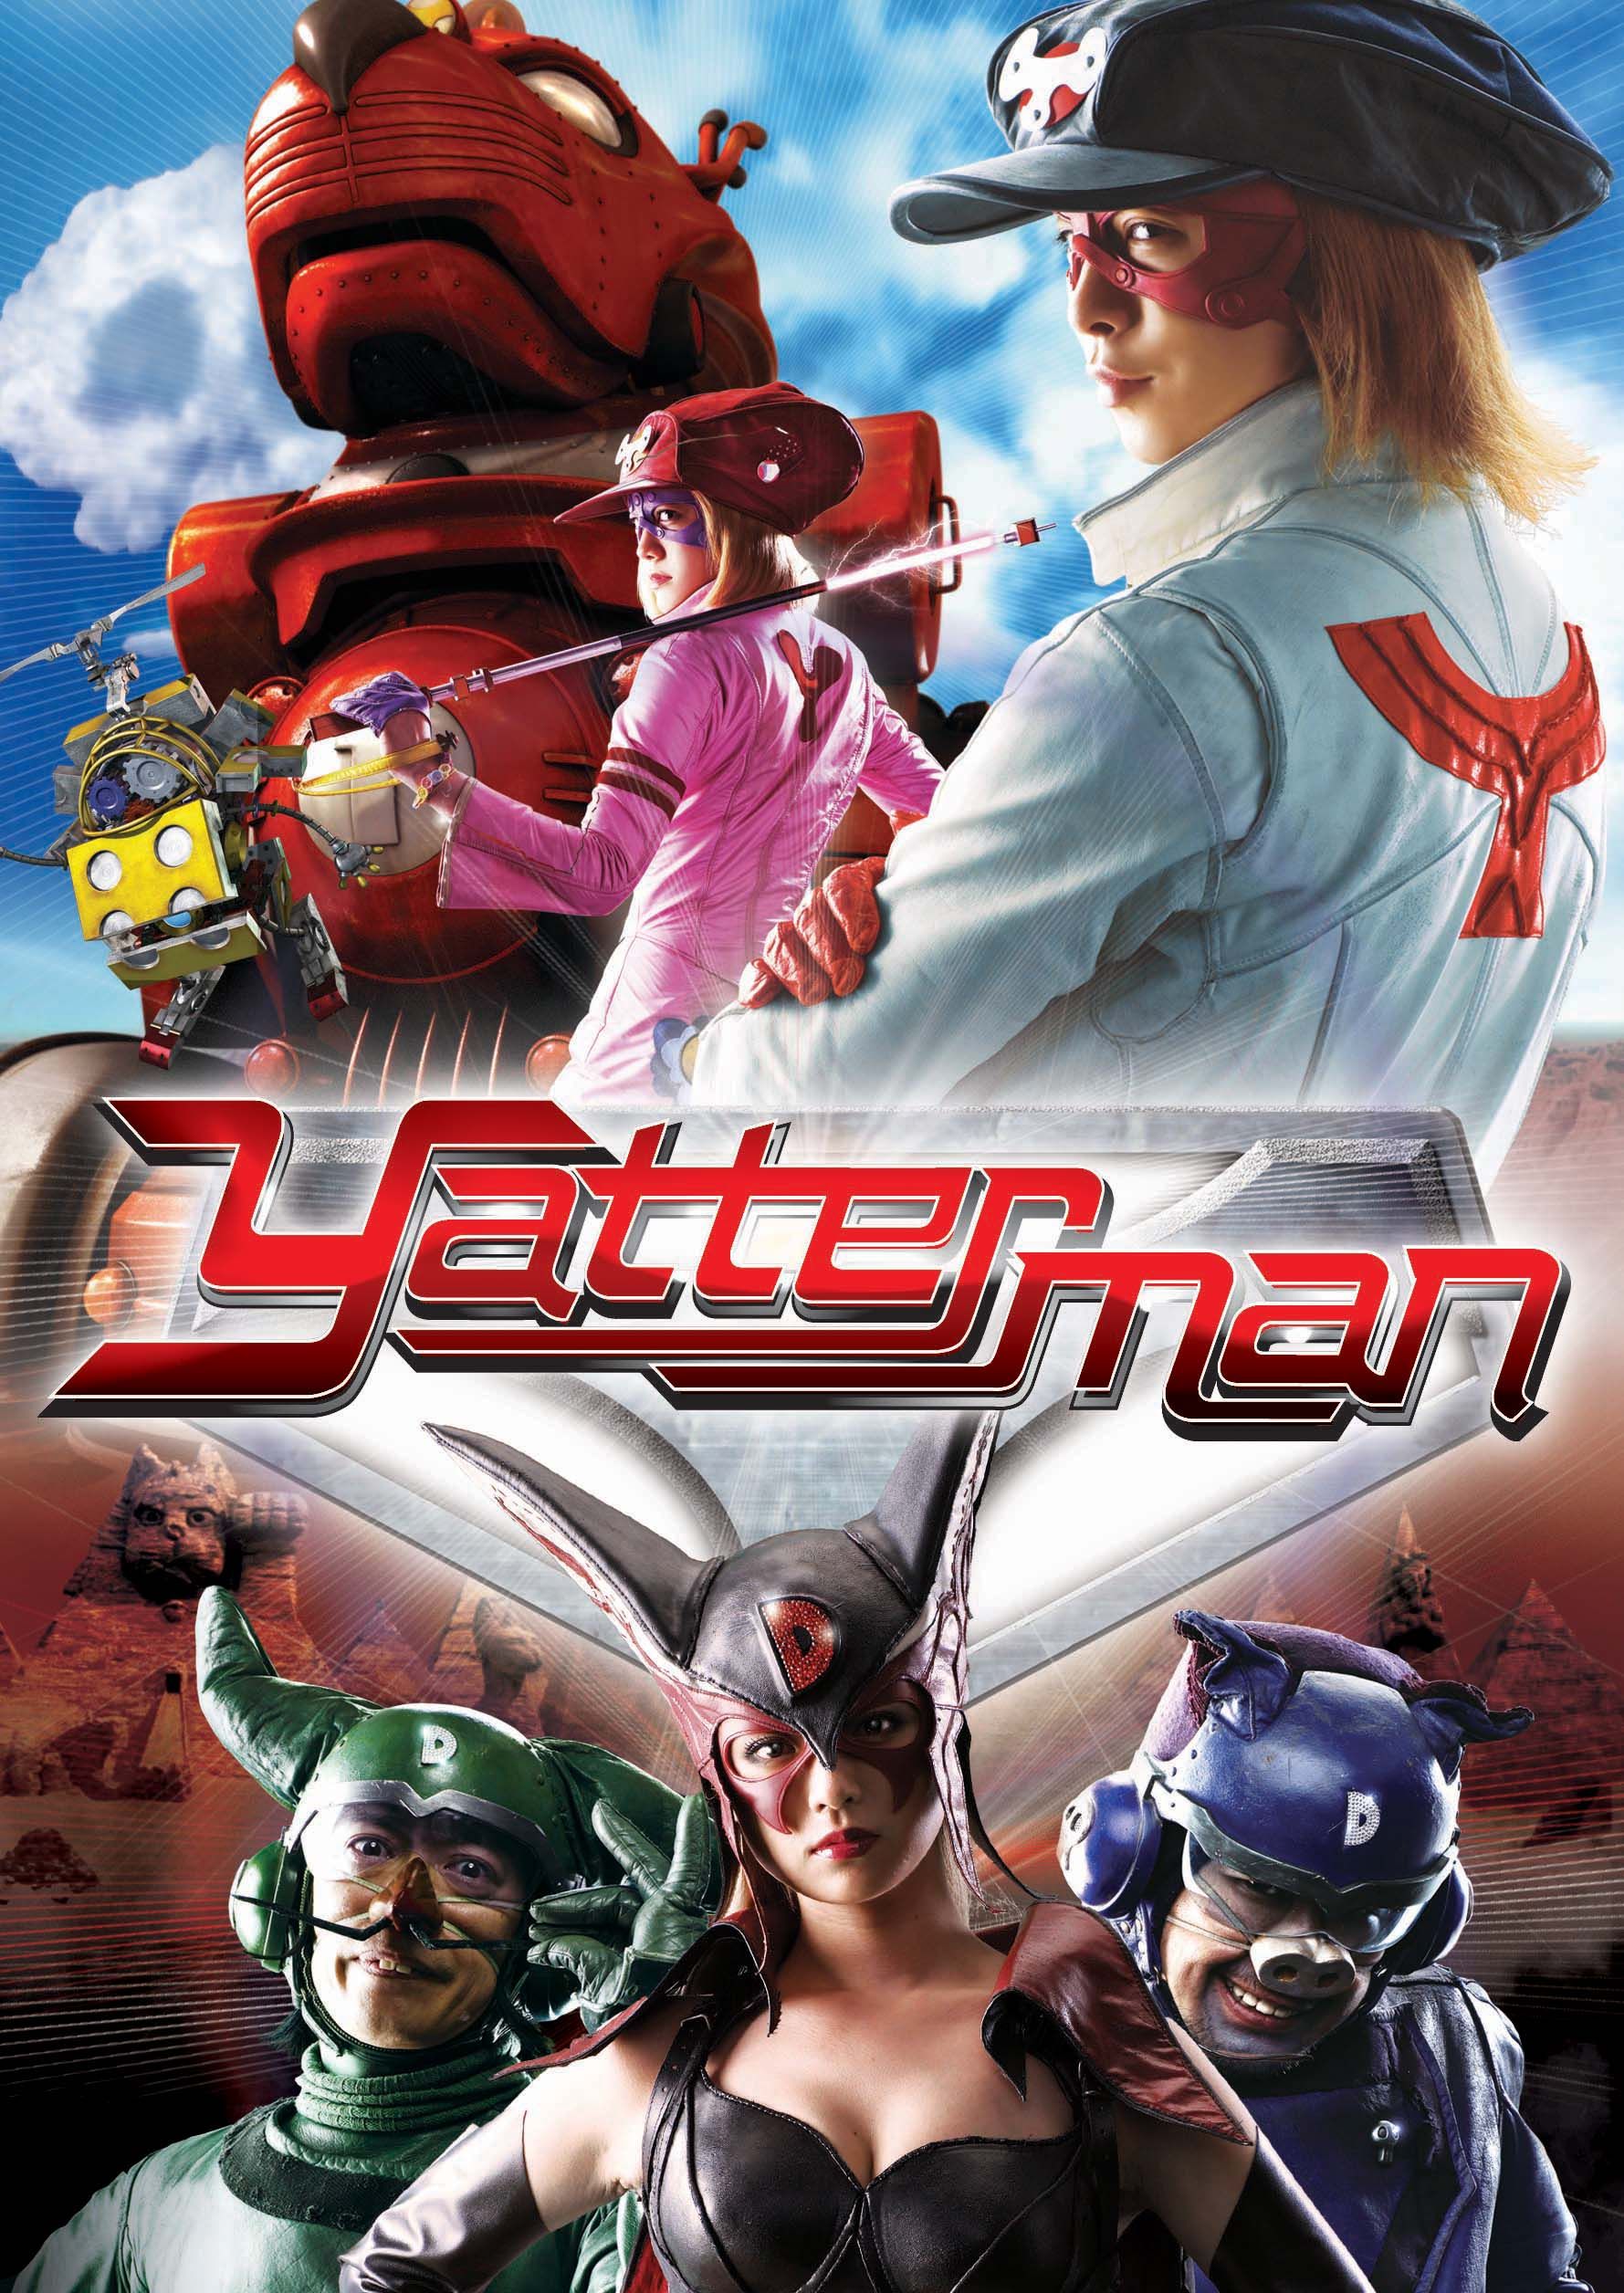 In its third trailer, the live-action Yatterman prequel Doronjo introduces more of its cast.